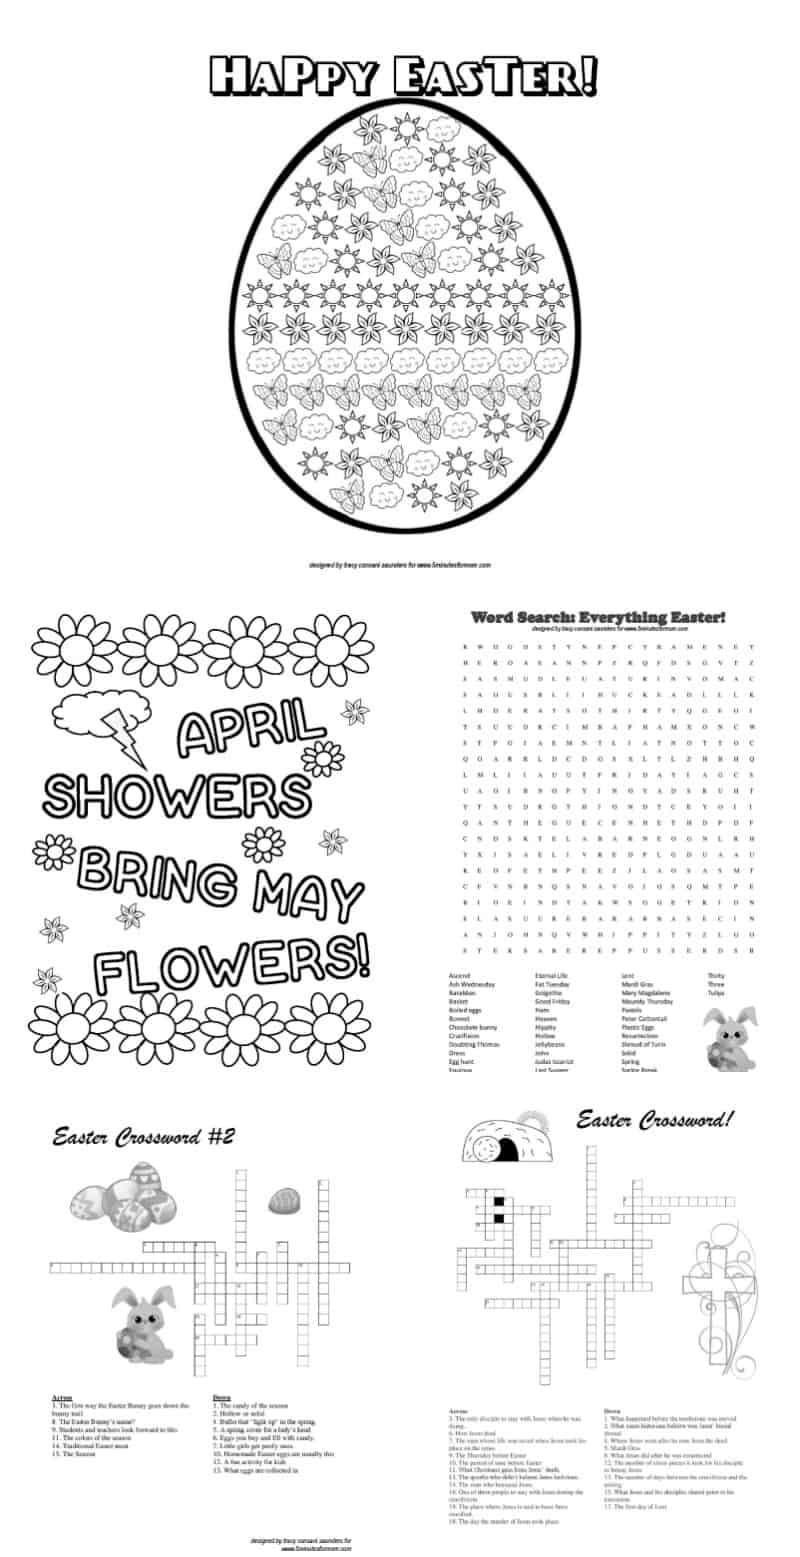 Easter Printables for Kids - Easter Crosswords and Coloring Sheets